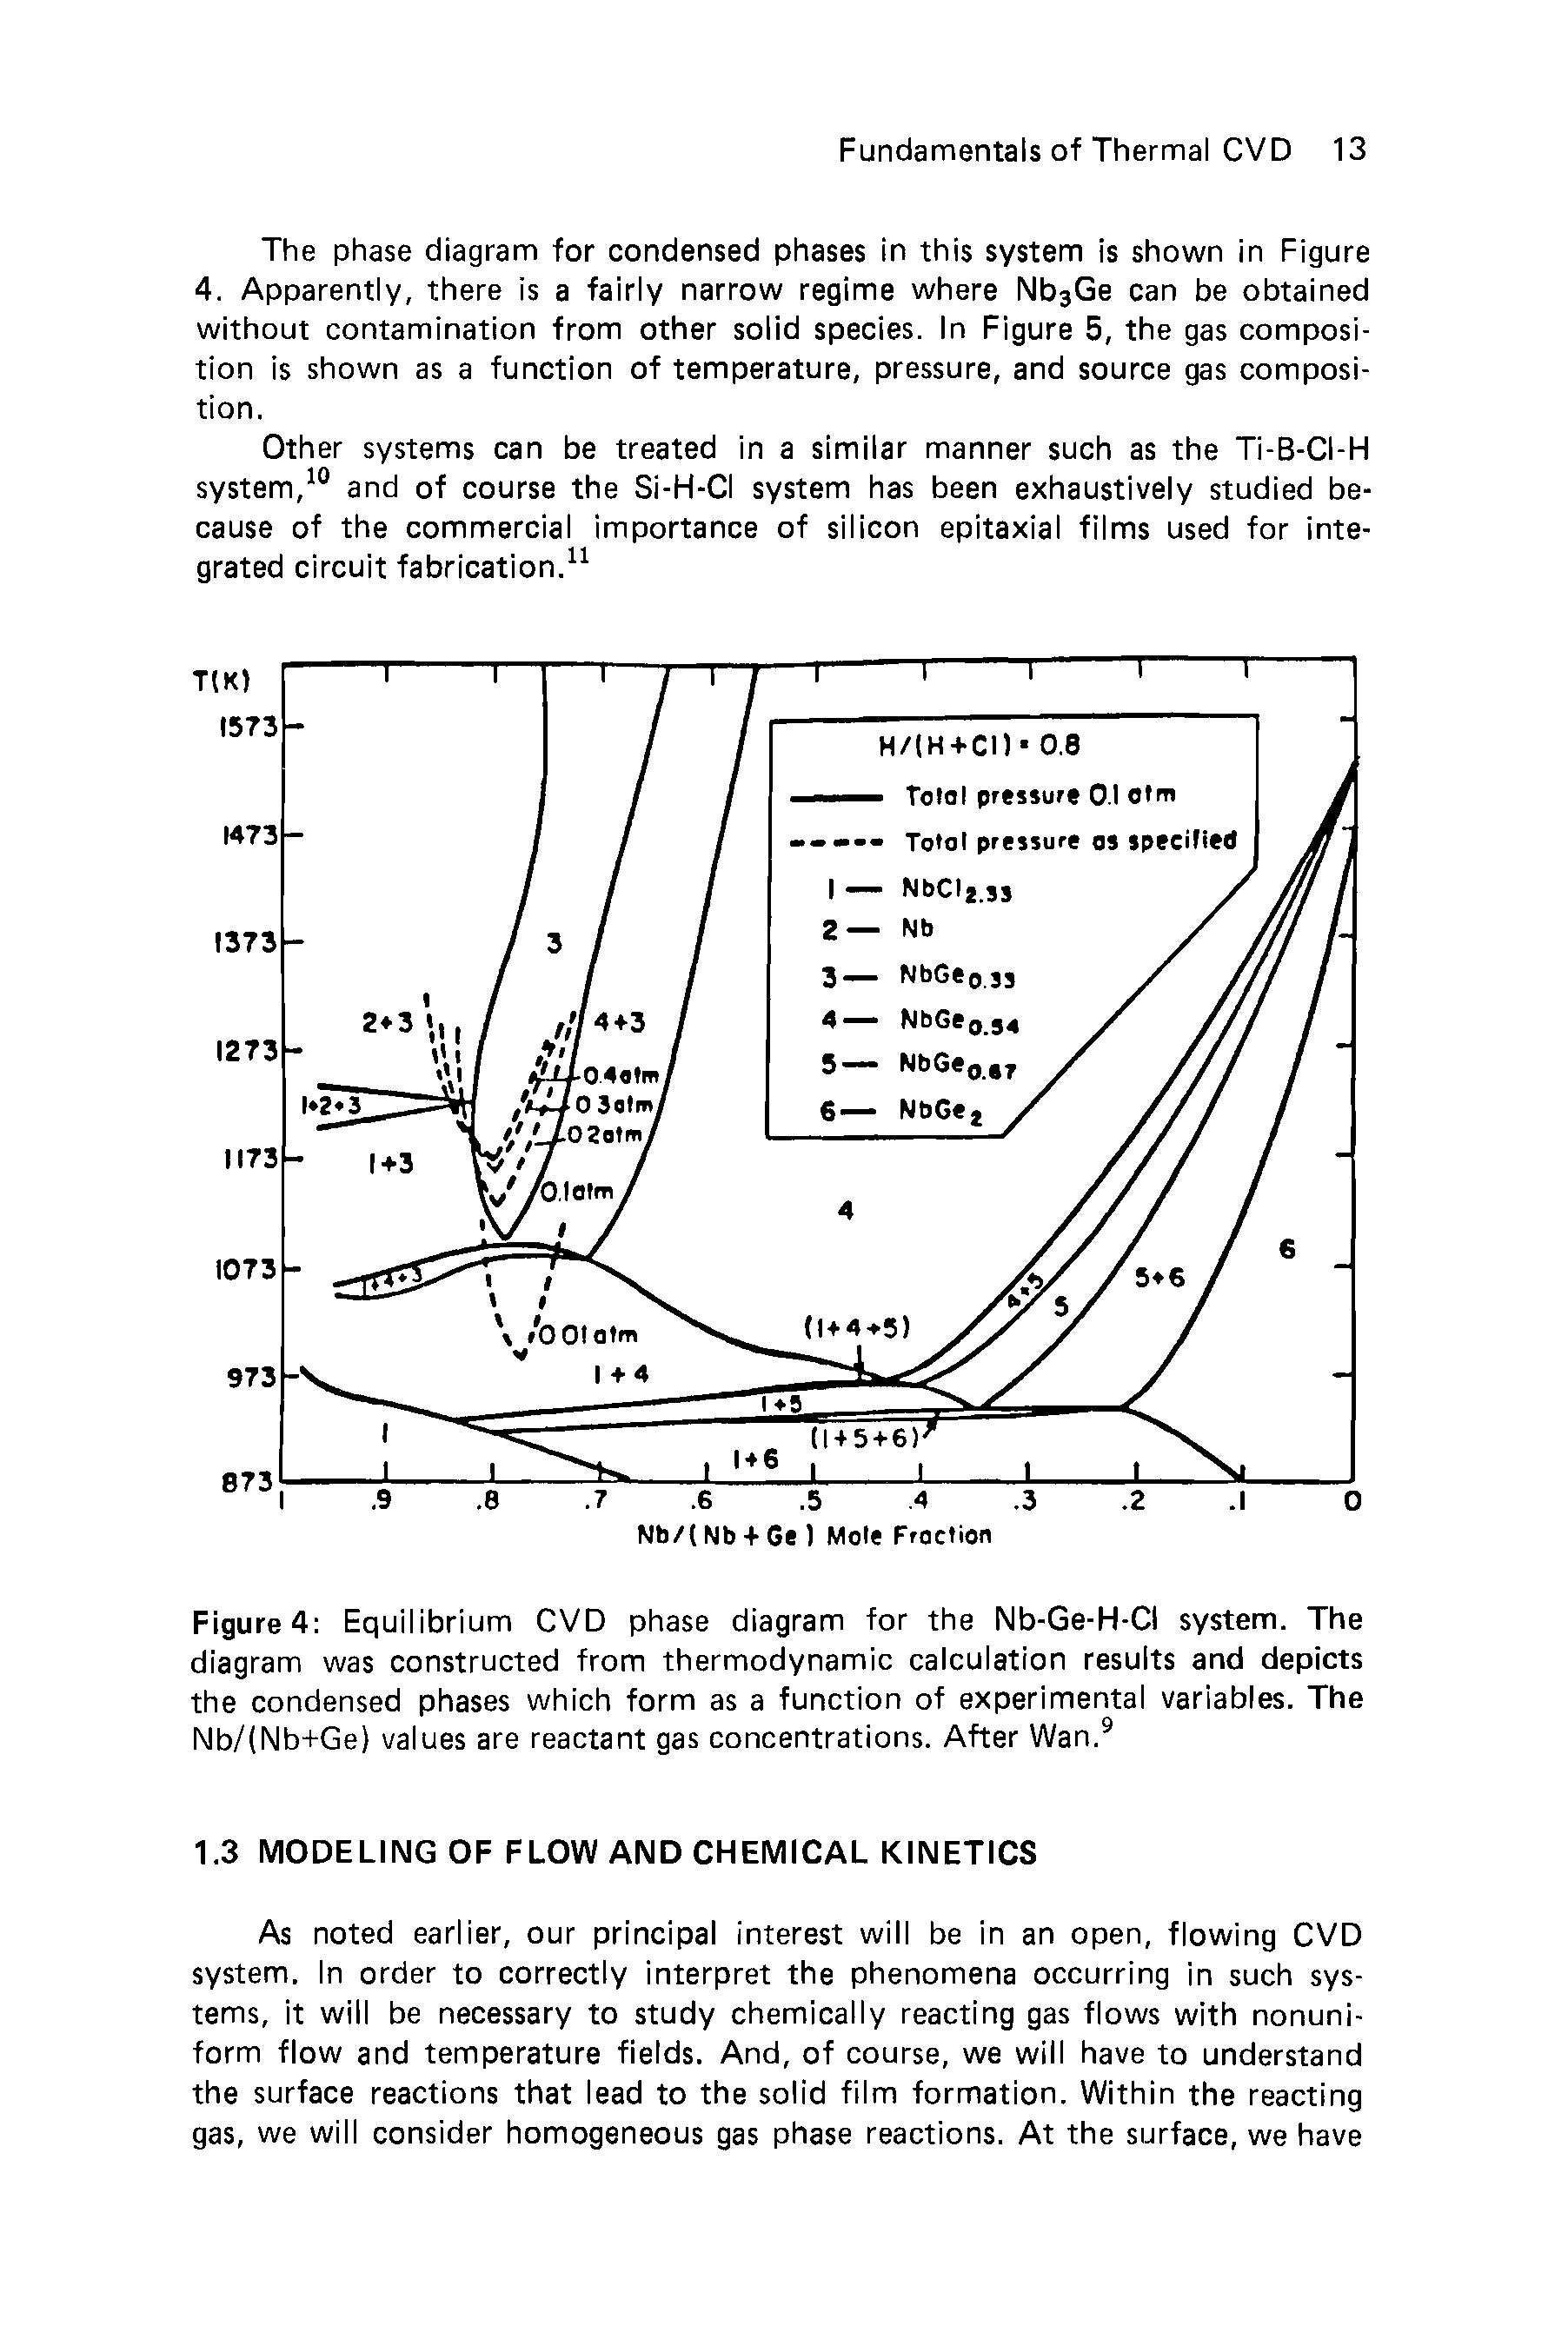 Figure 4 Equilibrium CVD phase diagram for the Nb-Ge-H-CI system. The diagram was constructed from thermodynamic calculation results and depicts the condensed phases which form as a function of experimental variables. The Nb/(Nb+Ge) values are reactant gas concentrations. After Wan.9...